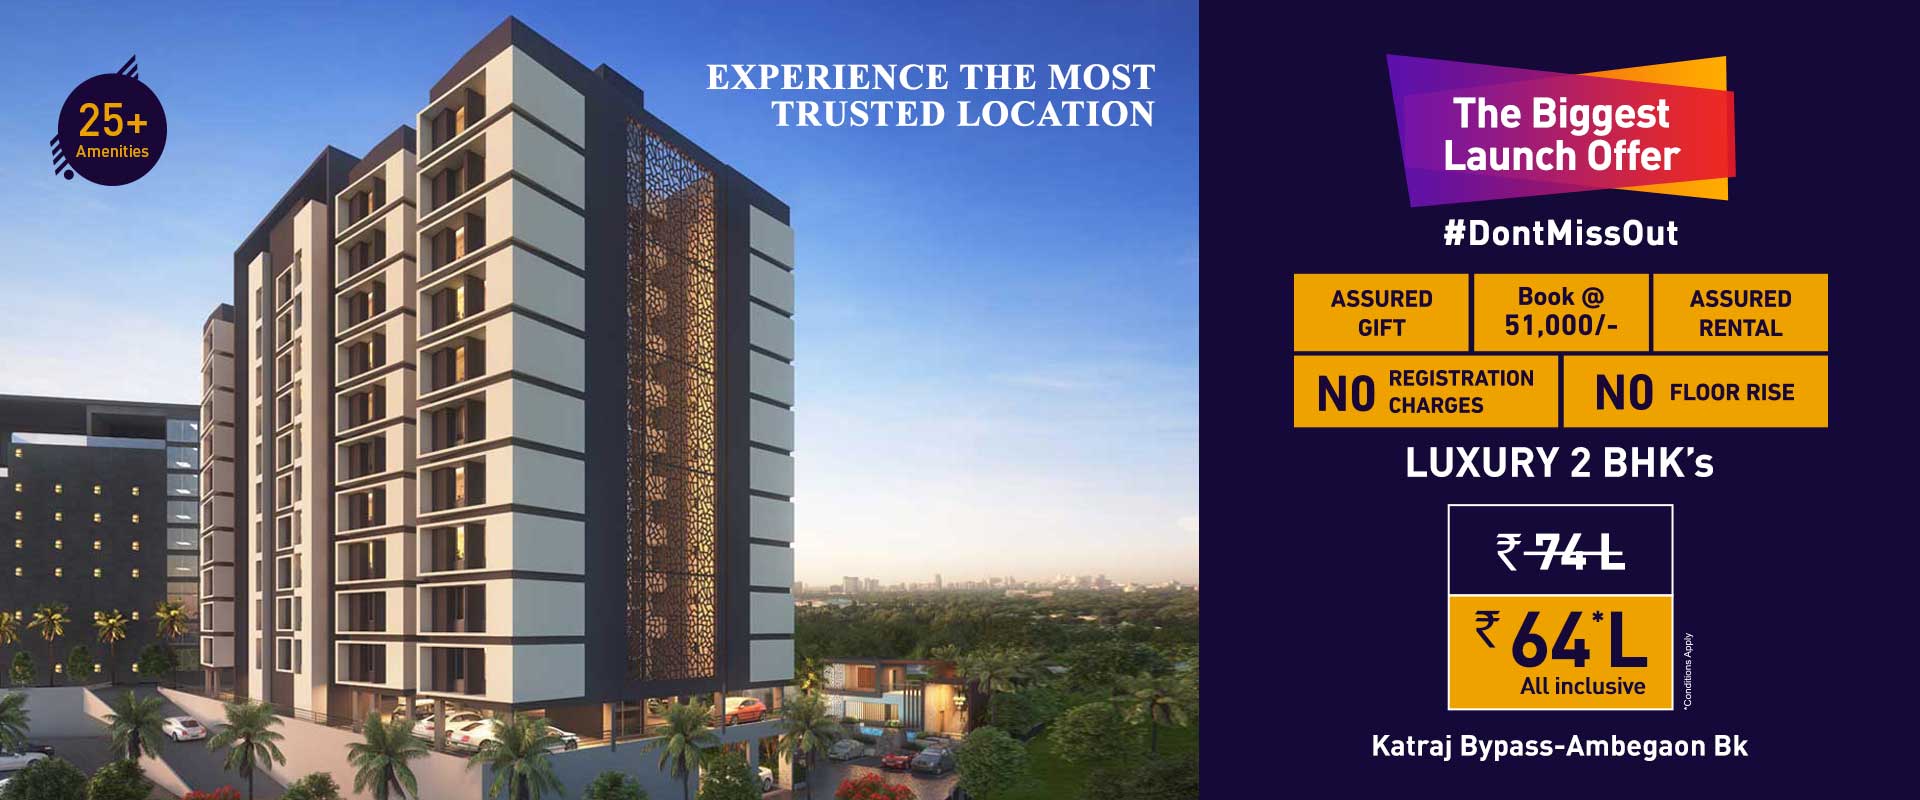 The biggest launch offer at Excellaa Residency in Pune Update